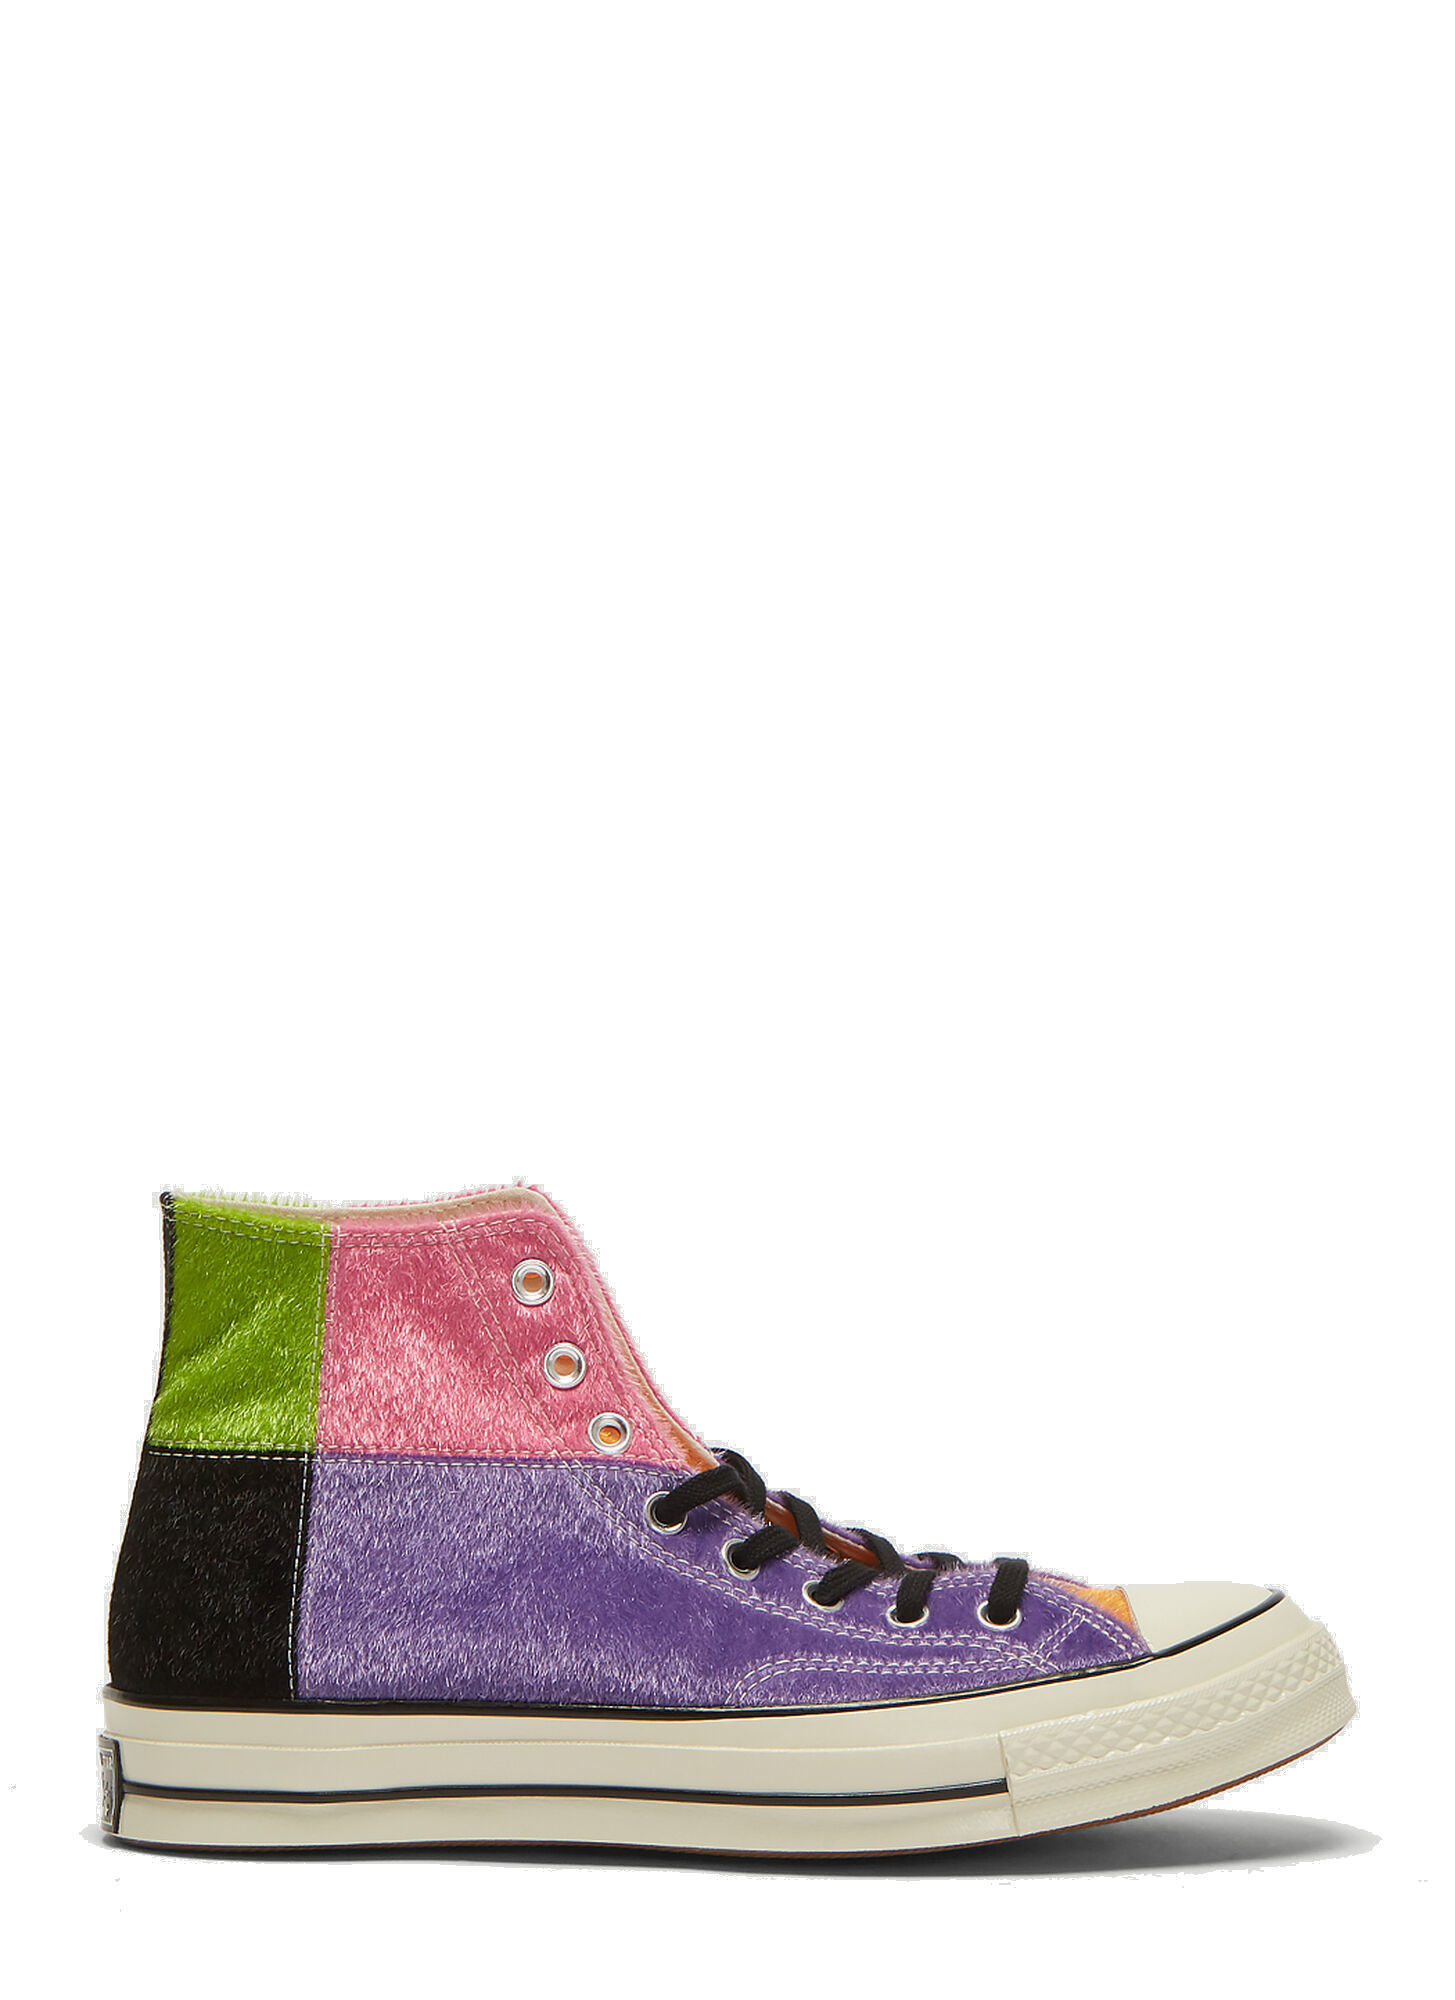 Photo: Patchwork High Chuck Taylor 1970s All Star Sneakers in Purple